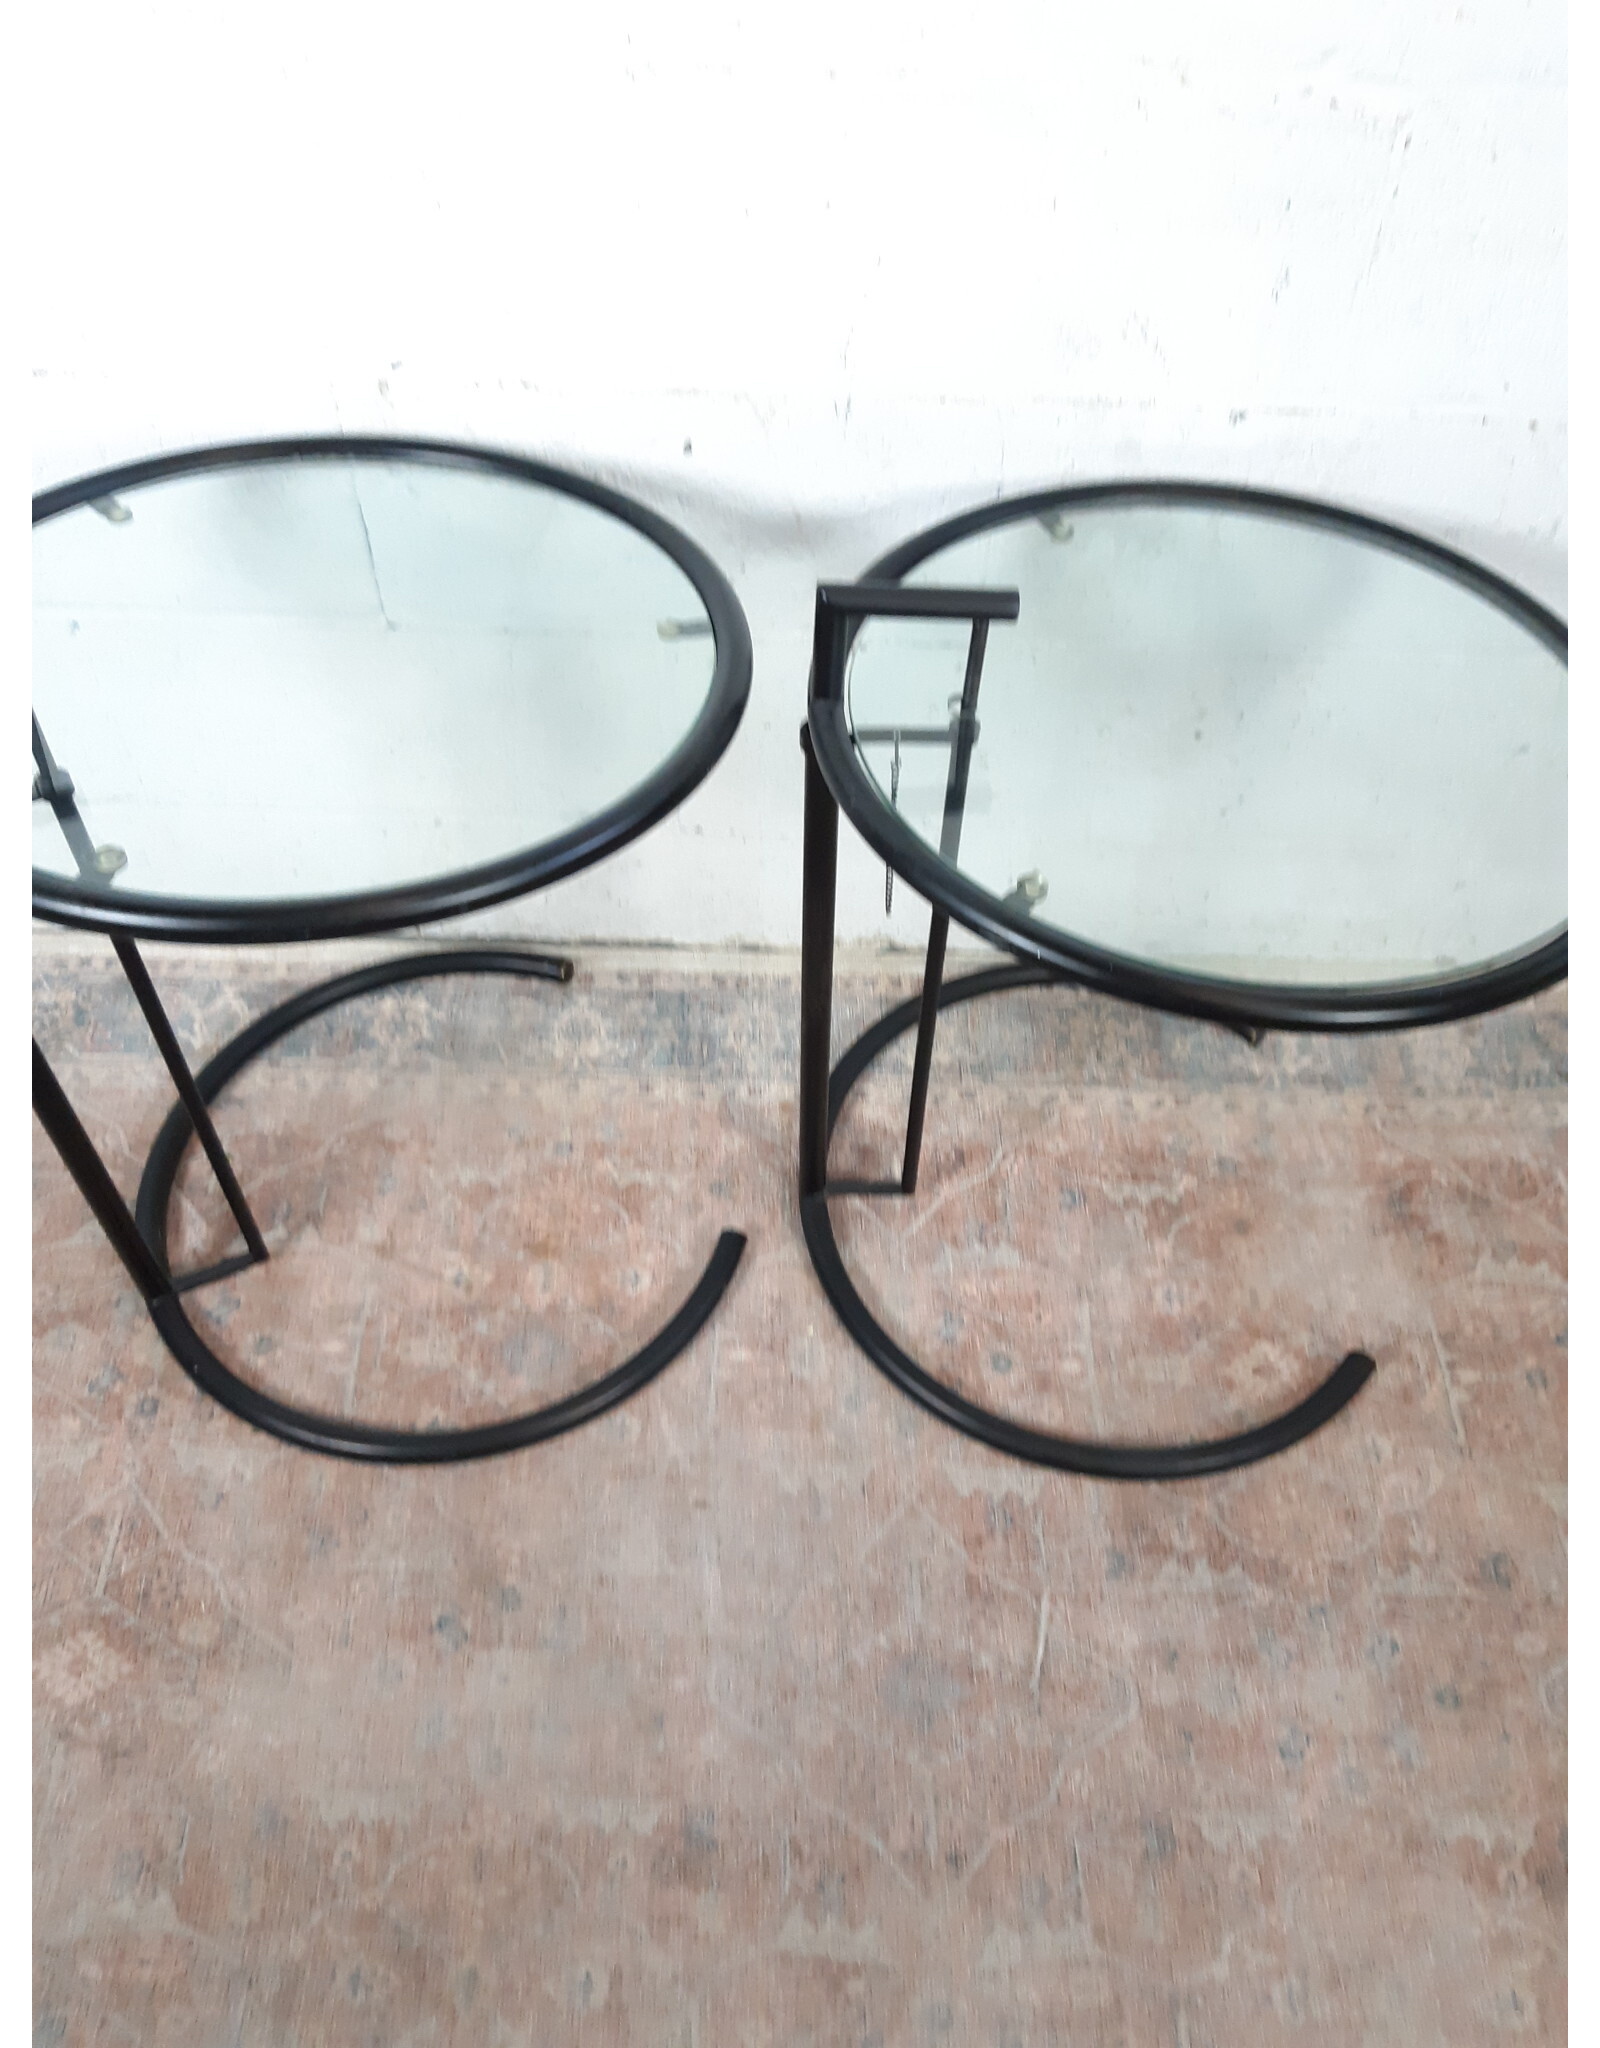 Black Eileen Grey Style End Table